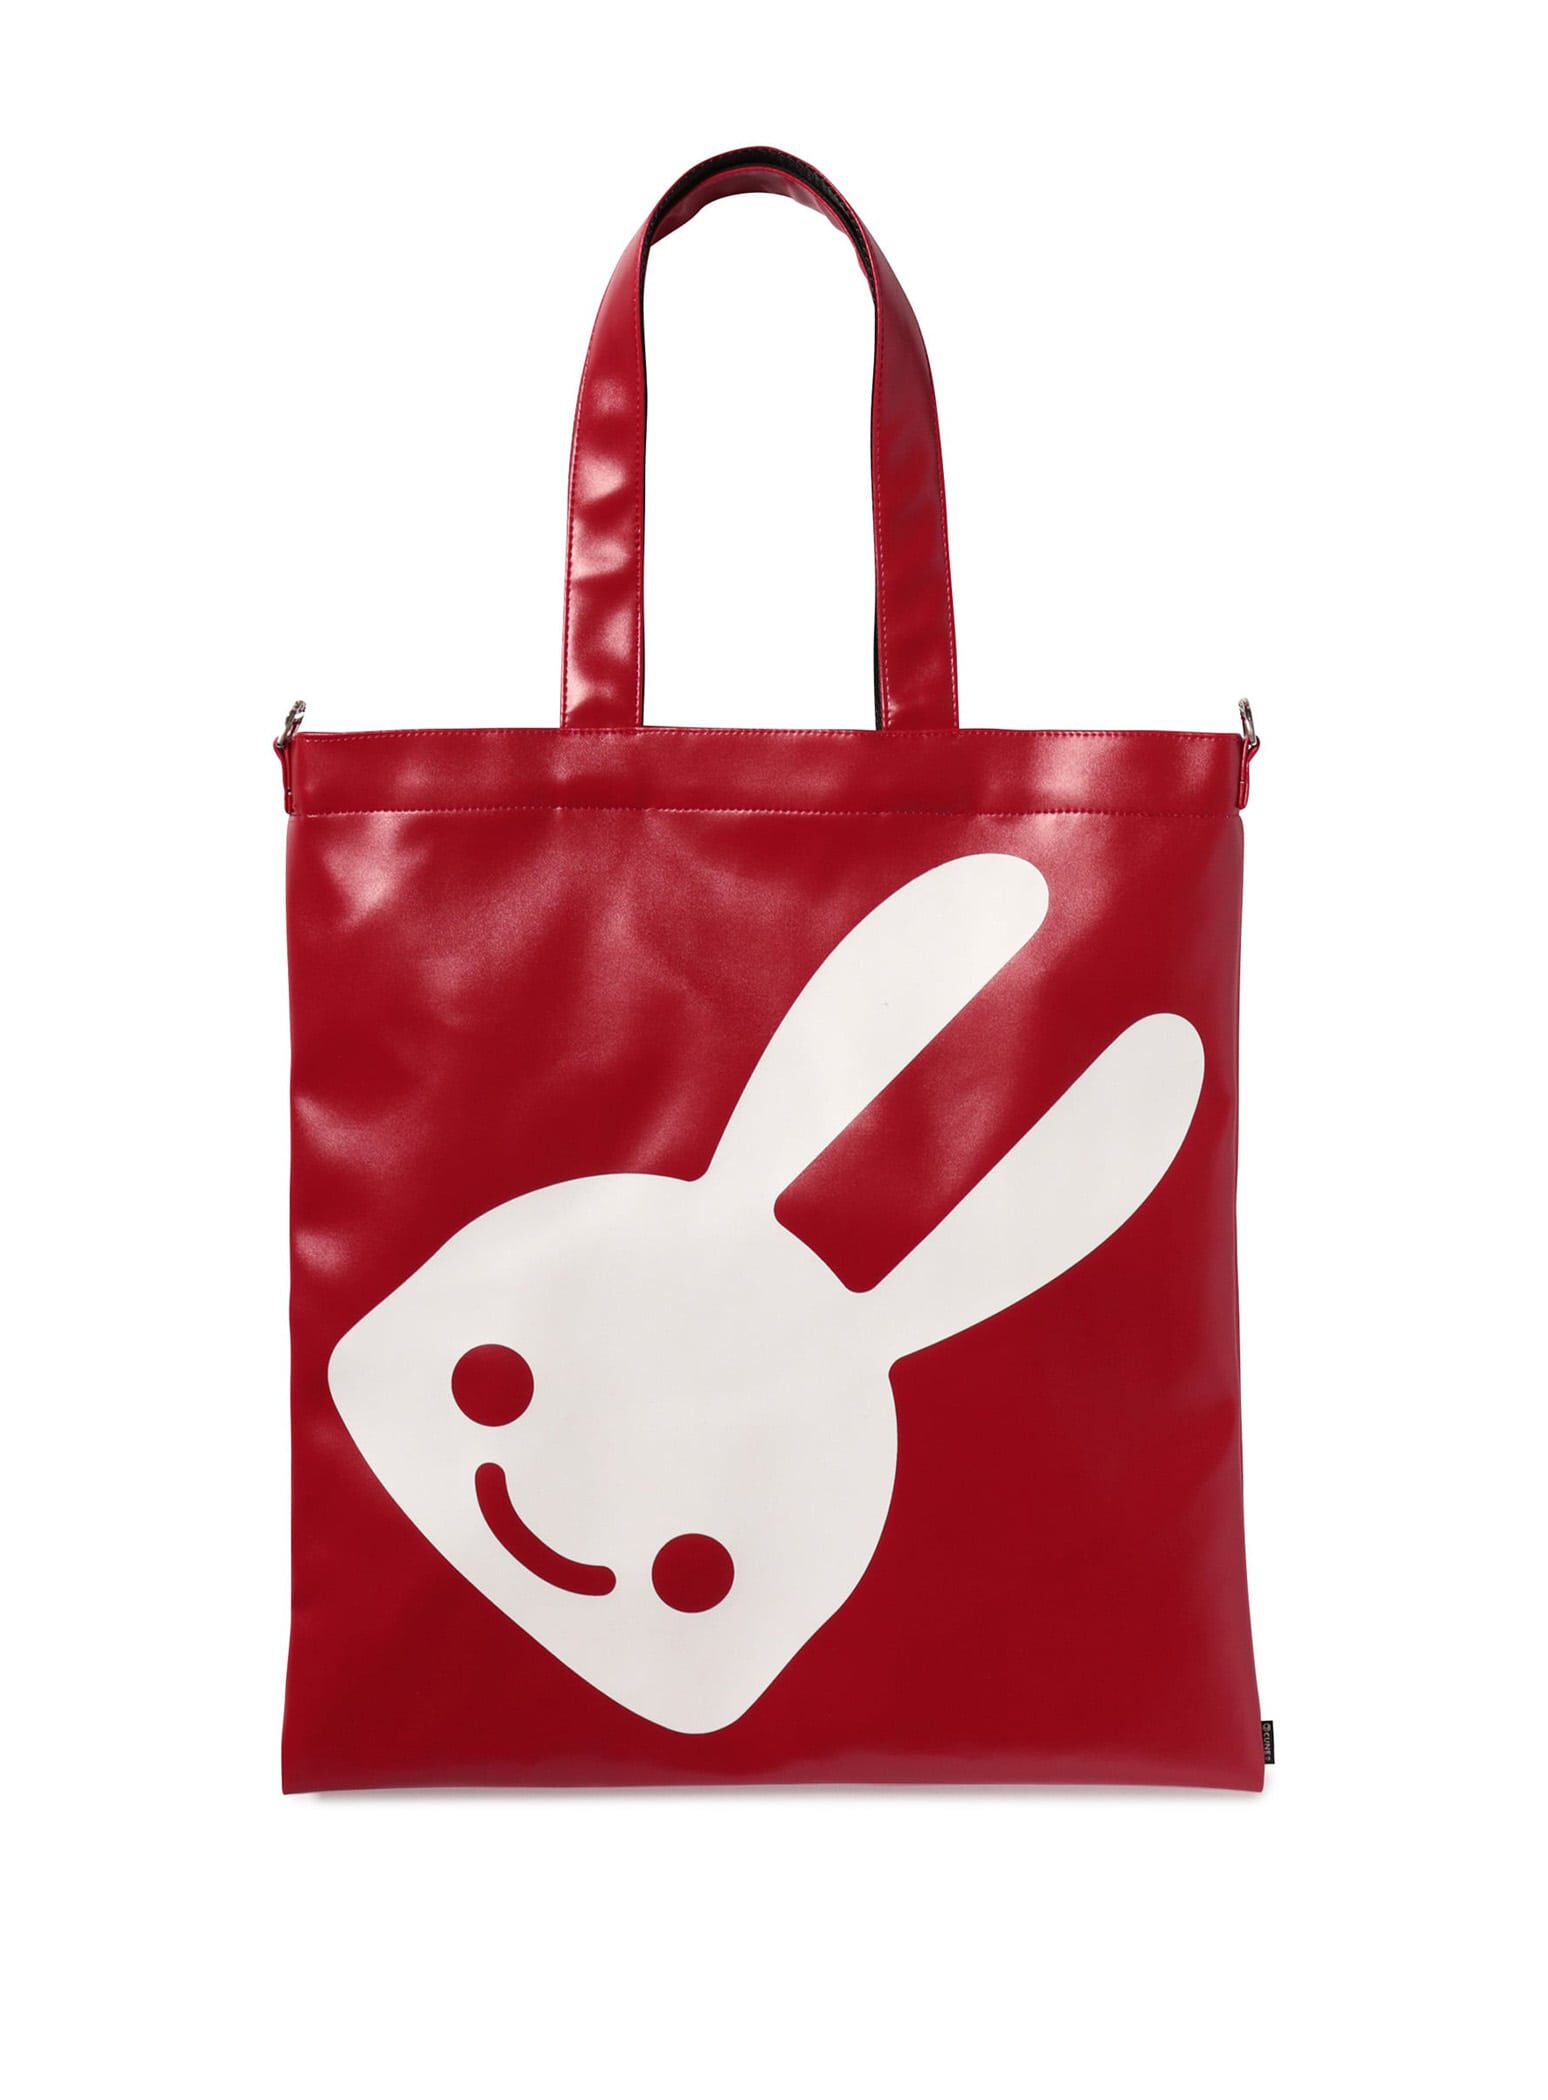 TOTE BAGS | CUNE Official Global Online Store